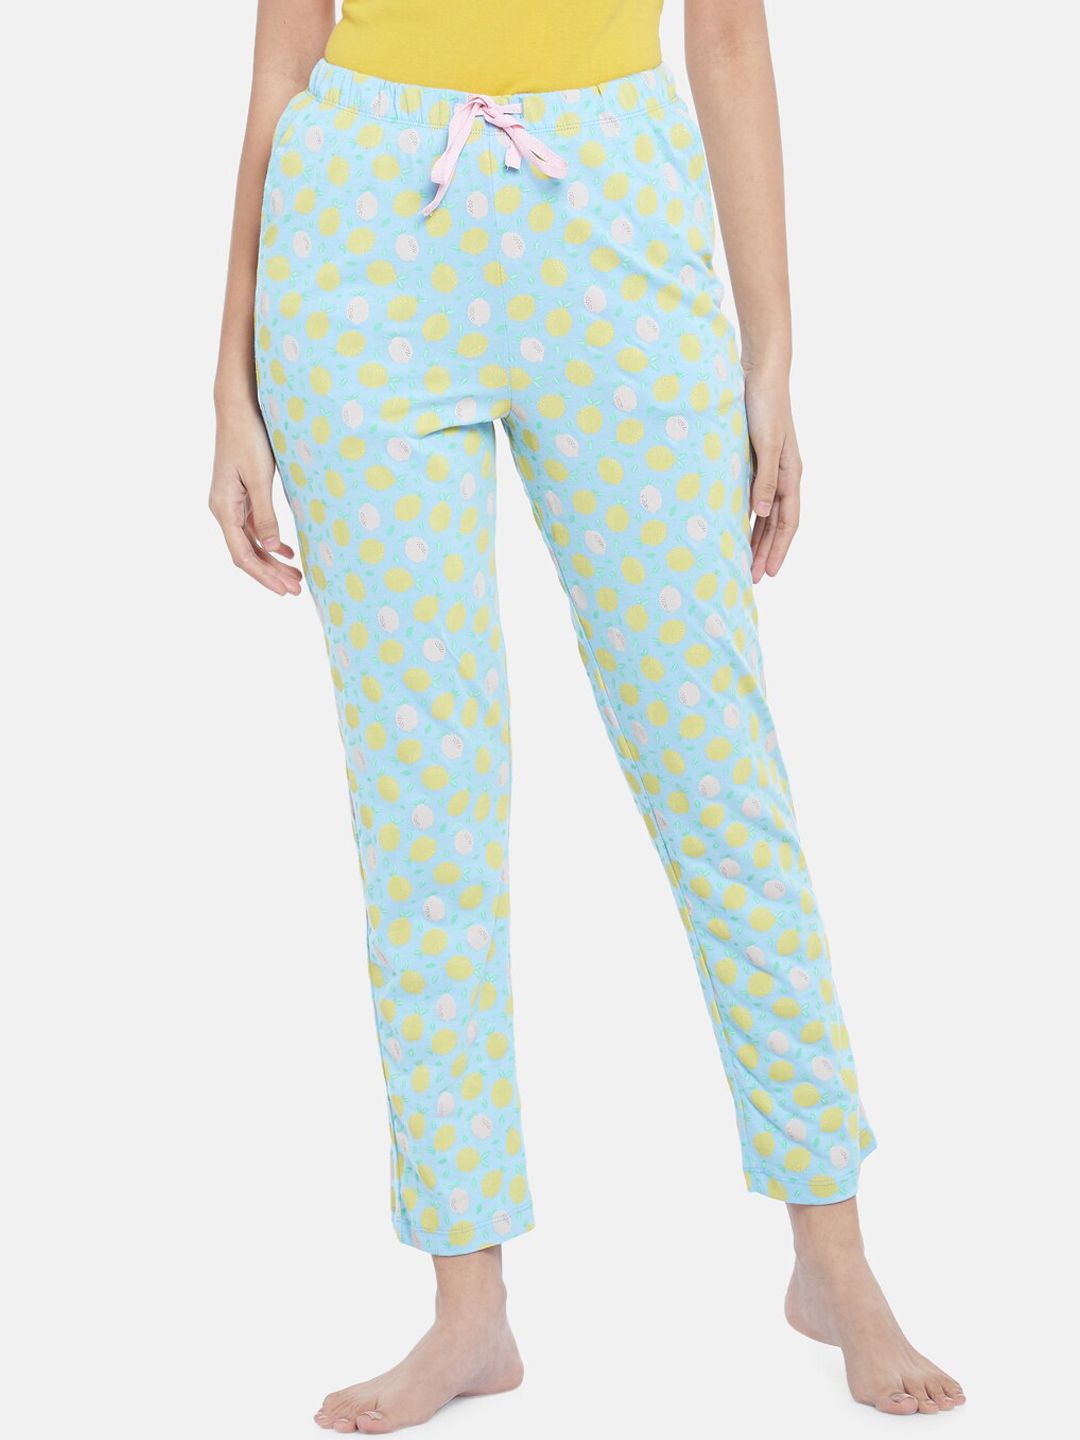 Dreamz by Pantaloons Women Turquoise Blue Printed Cotton Lounge Pants Price in India